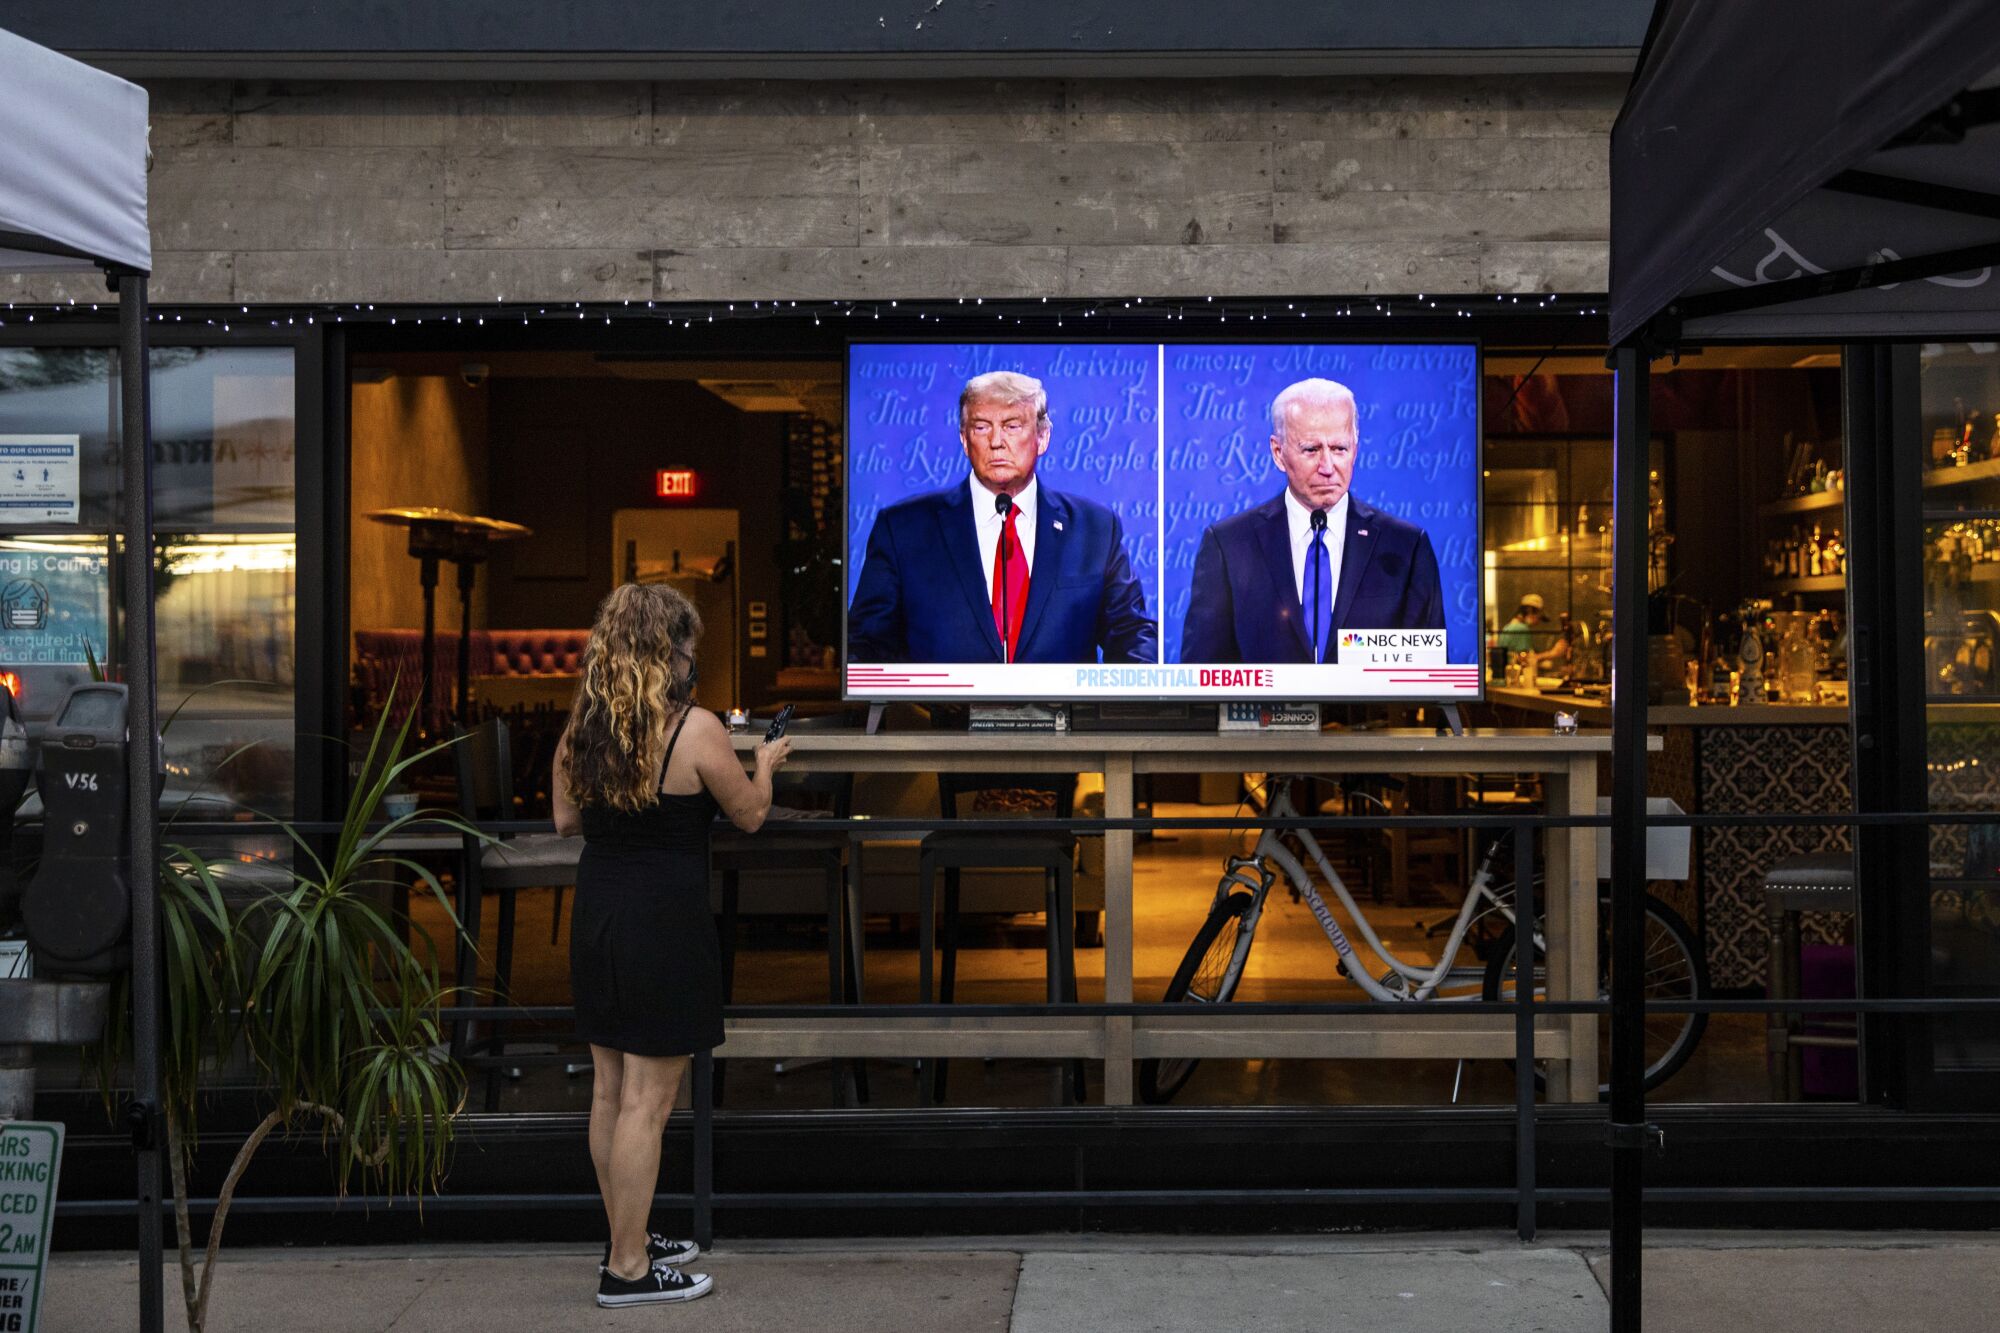 A waitress with a remote standing in front of a TV showing the debate set up in the window of a restaurant